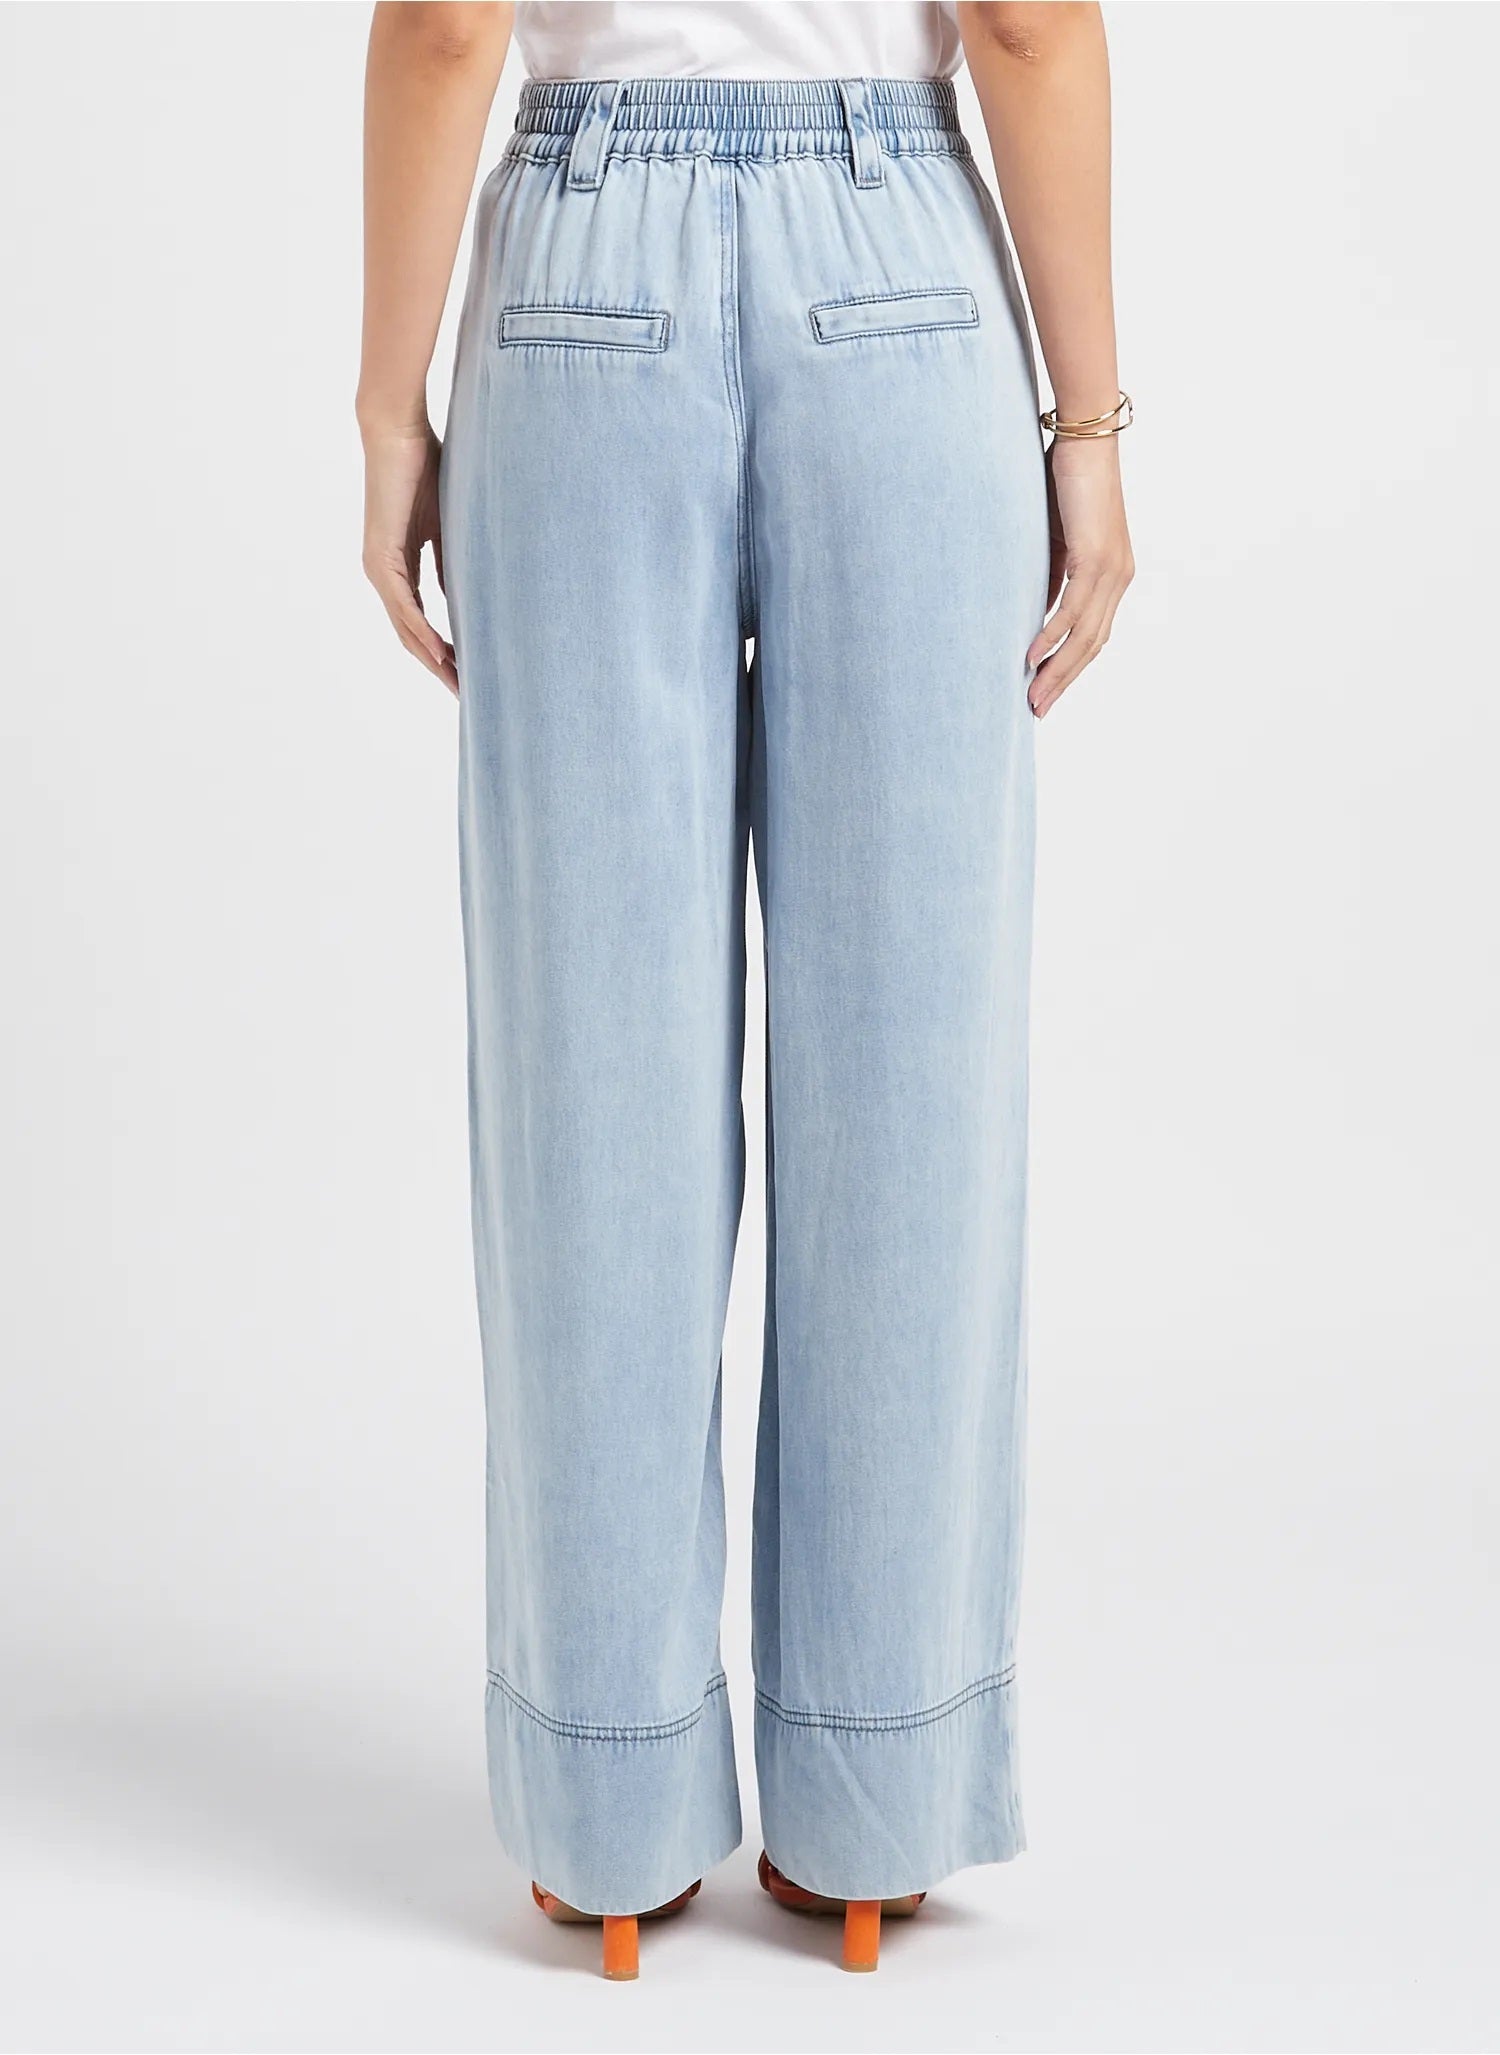 Woven Jeans Romy from Suncoo